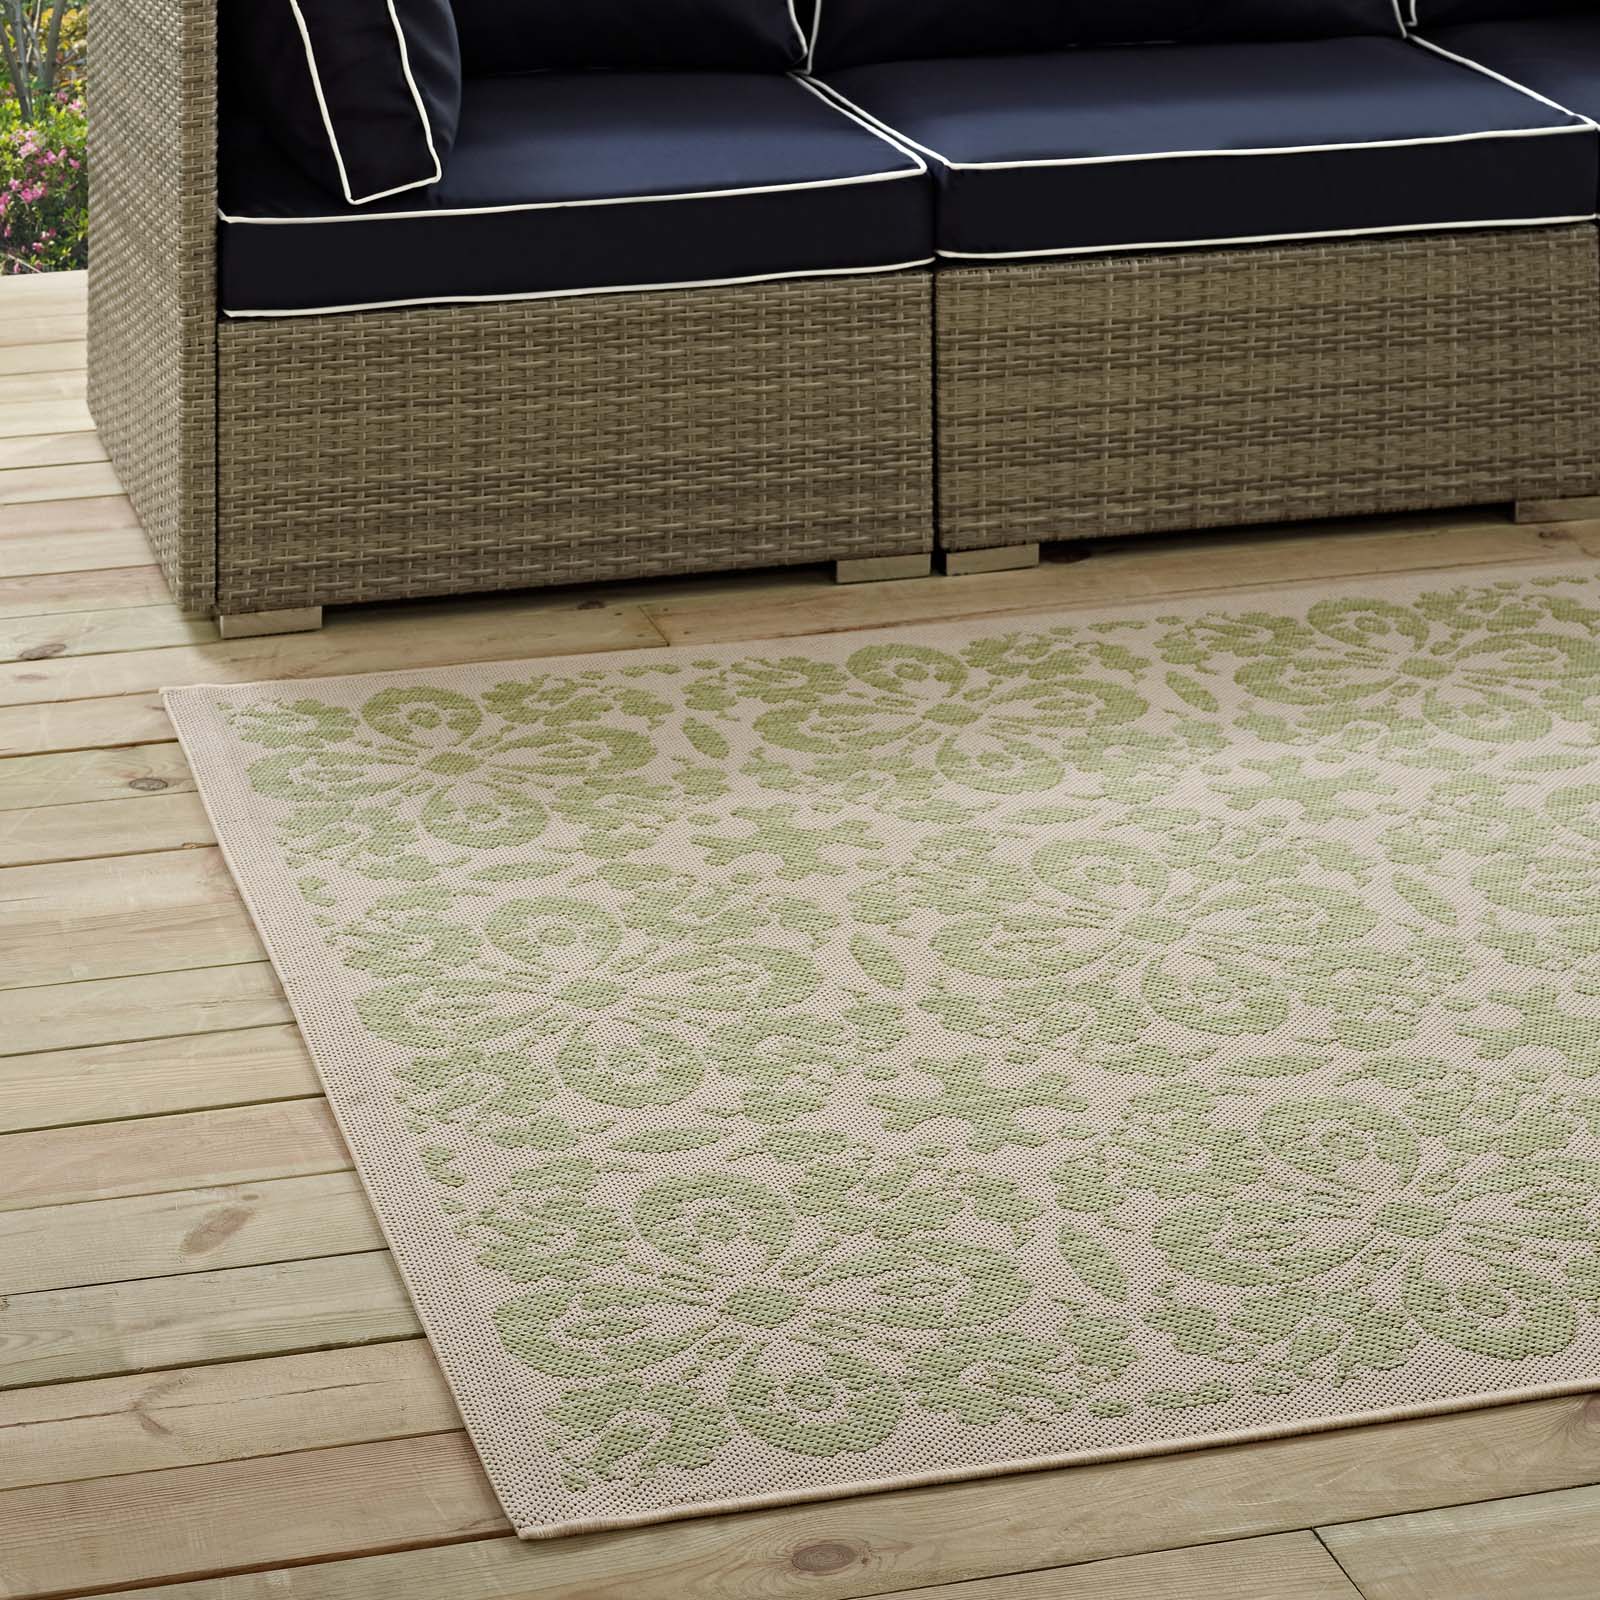 Ariana Vintage Floral Trellis 9x12 Indoor and Outdoor Area Rug-Indoor and Outdoor Area Rug-Modway-Wall2Wall Furnishings